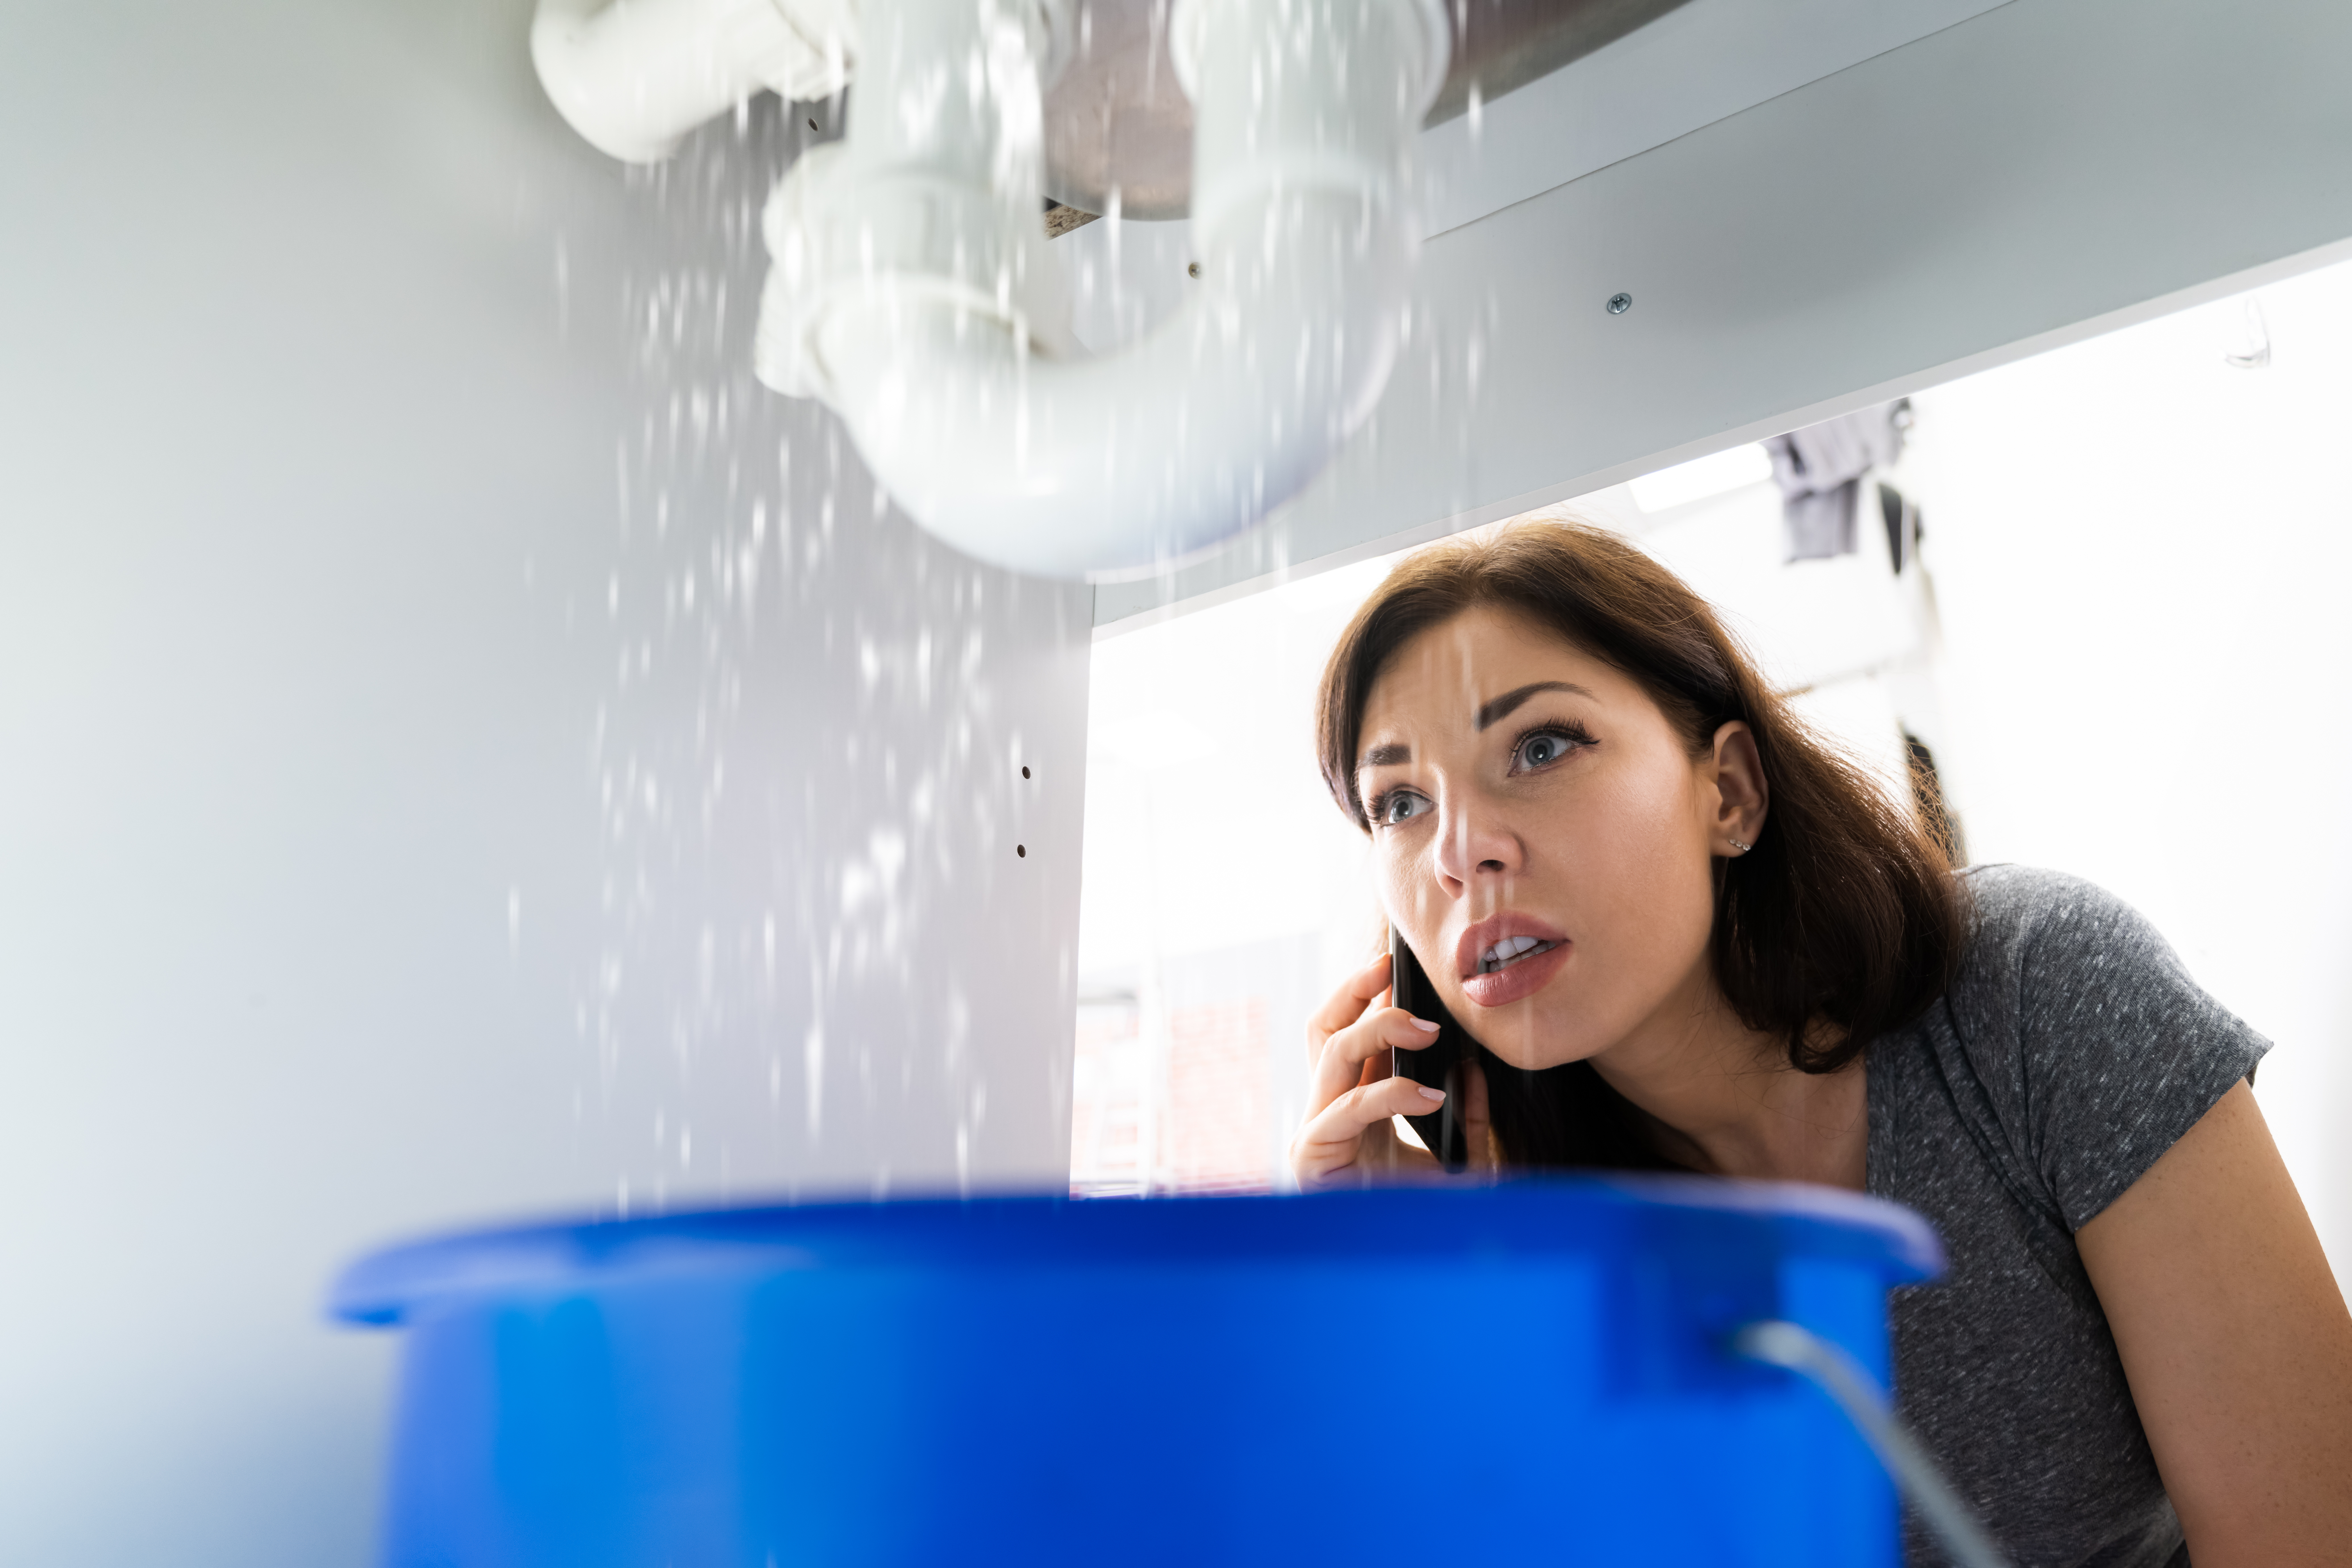 How to Prepare for an HVAC or Plumbing Emergency